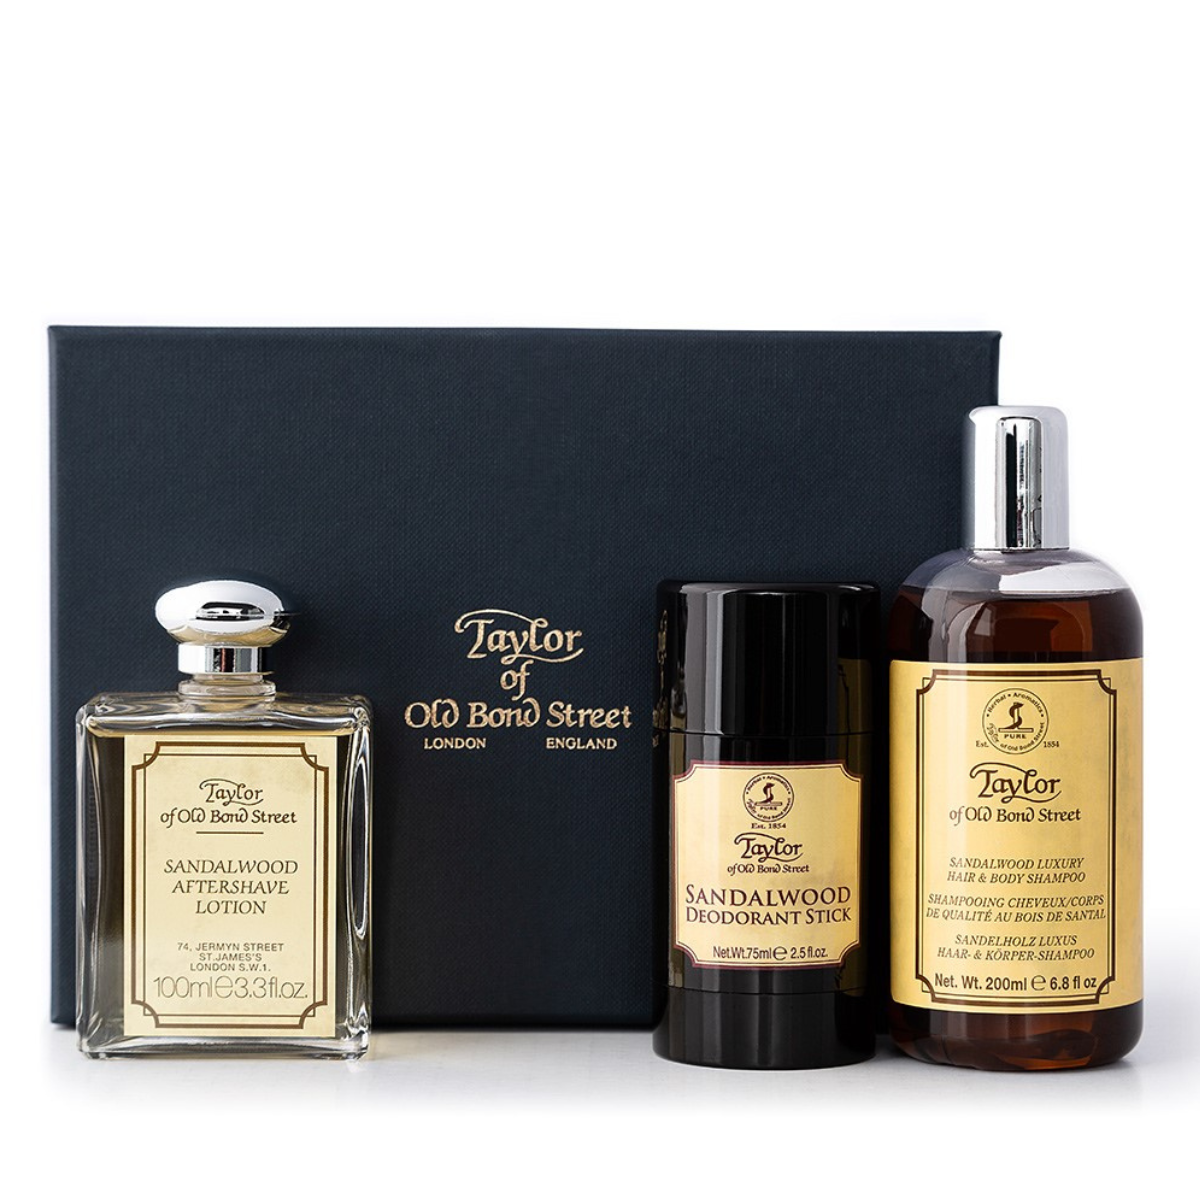 Sandalwood Hair and Body Collection Gift Set | Taylor Old Bond Street -  Taylor of Old Bond Street